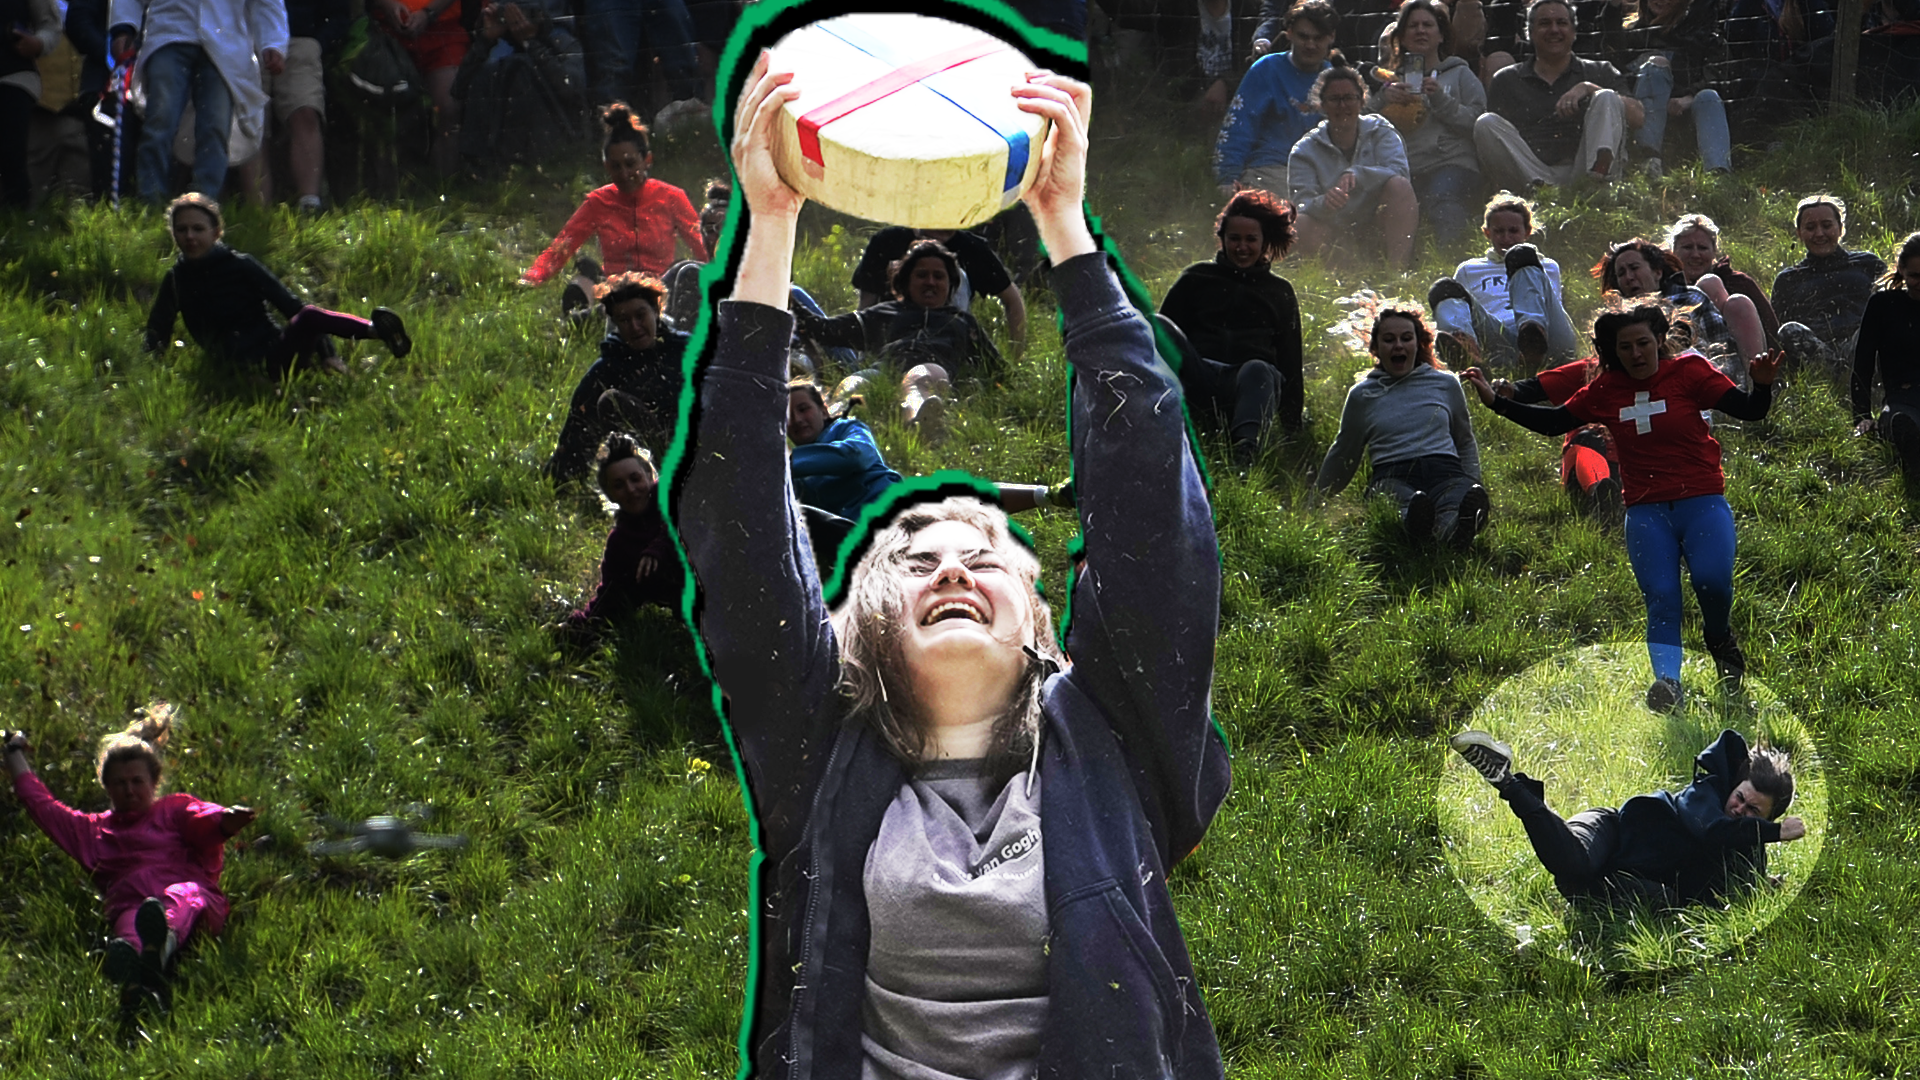 Woman knocked unconscious but wins chaotic U.K. race chasing cheese down a  hill